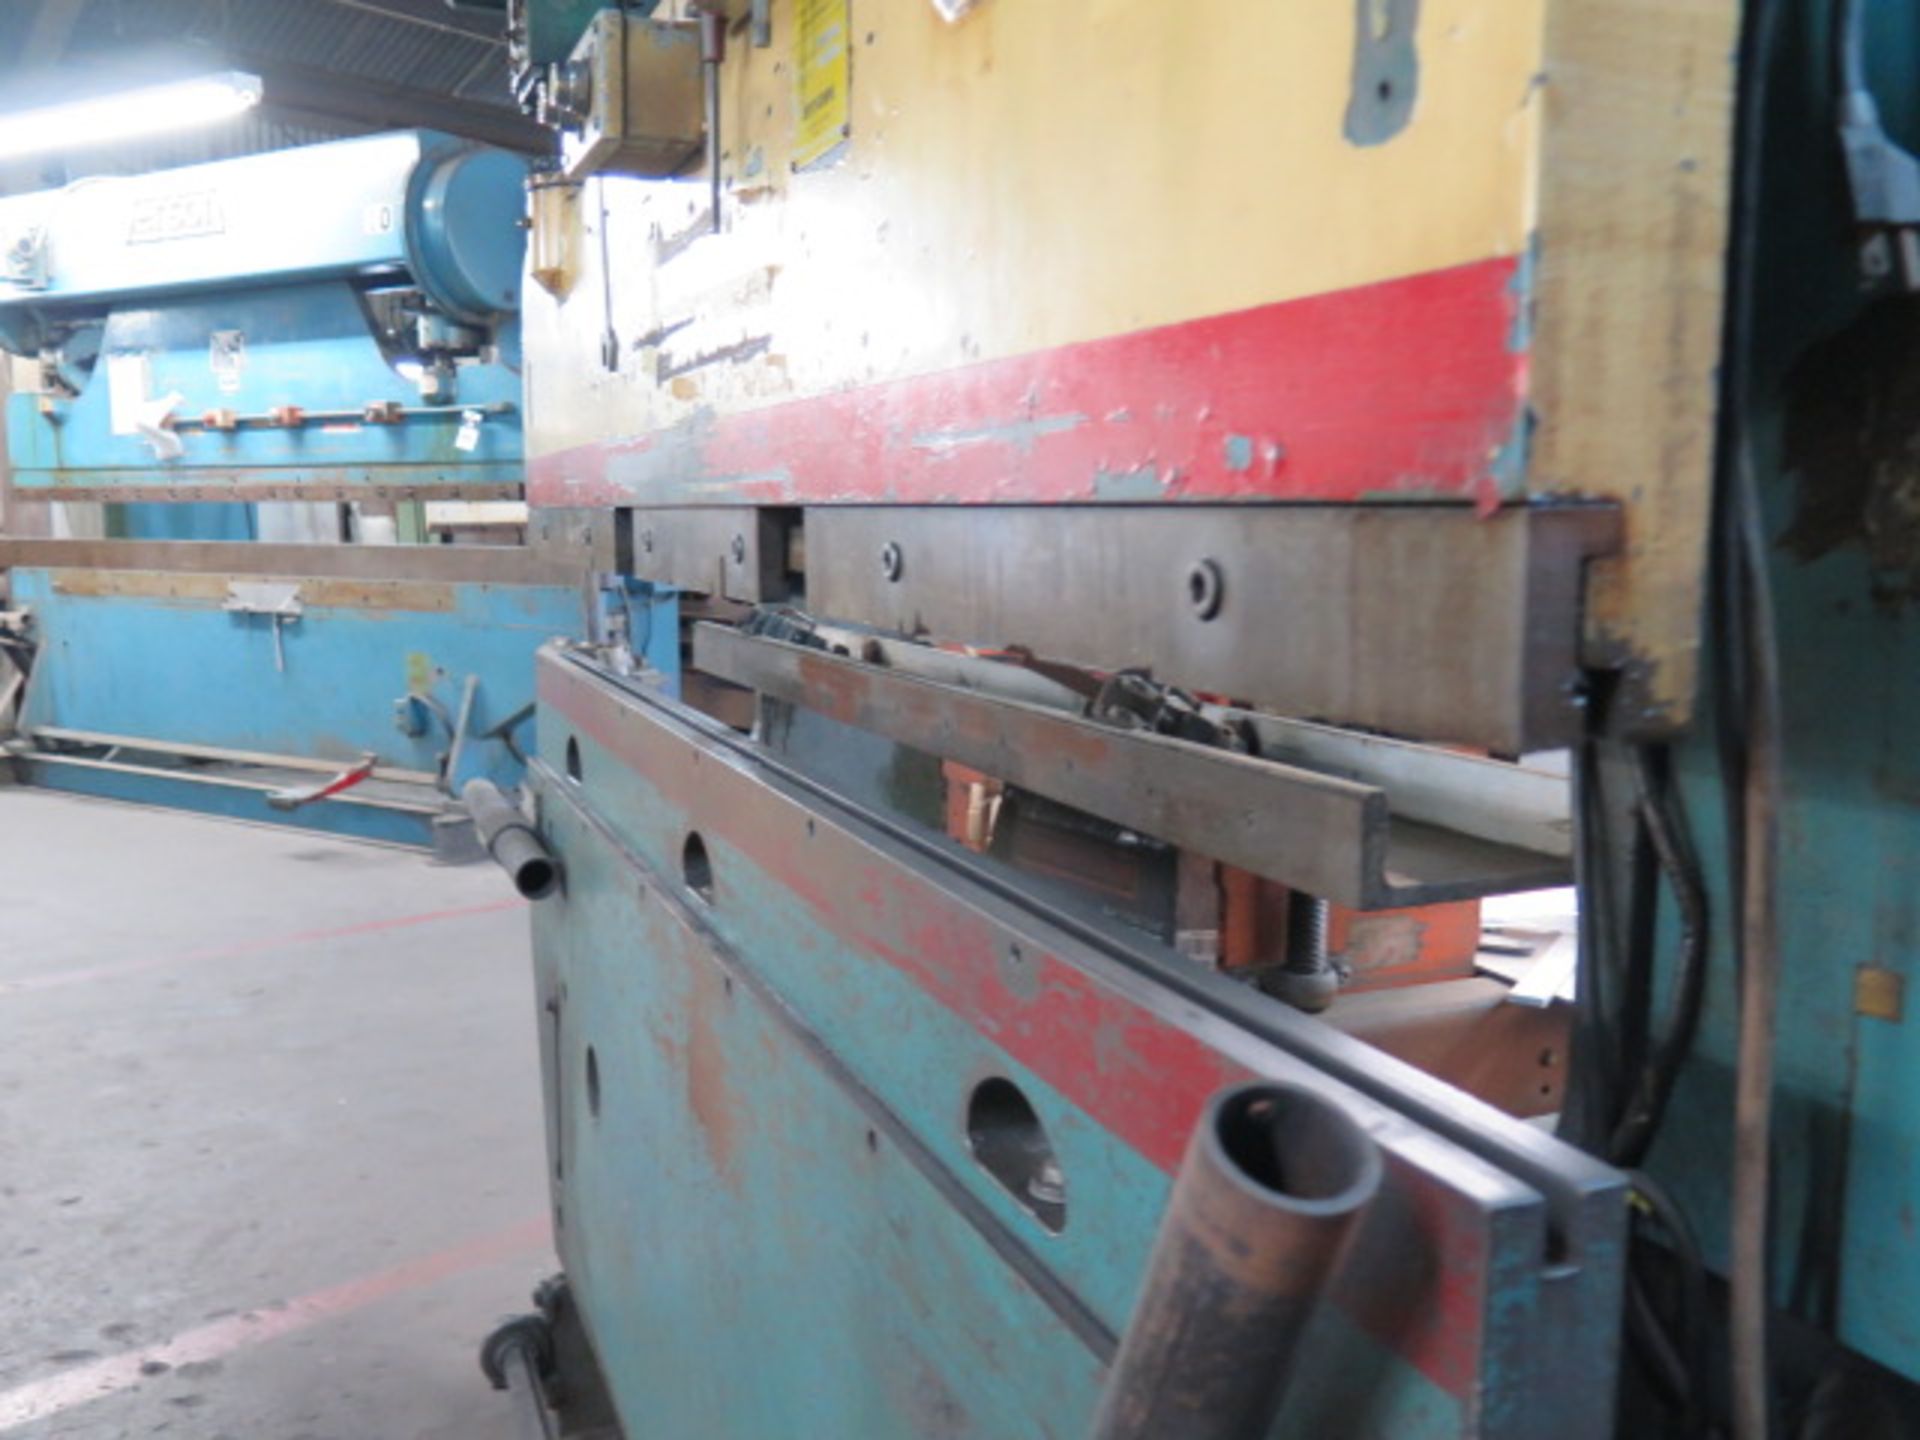 Wysong mdl. 55-4 55 Ton x 6’ CNC Press Brake w/ Dynabend 1 Controls and Back Gaging, SOLD AS IS - Image 4 of 17